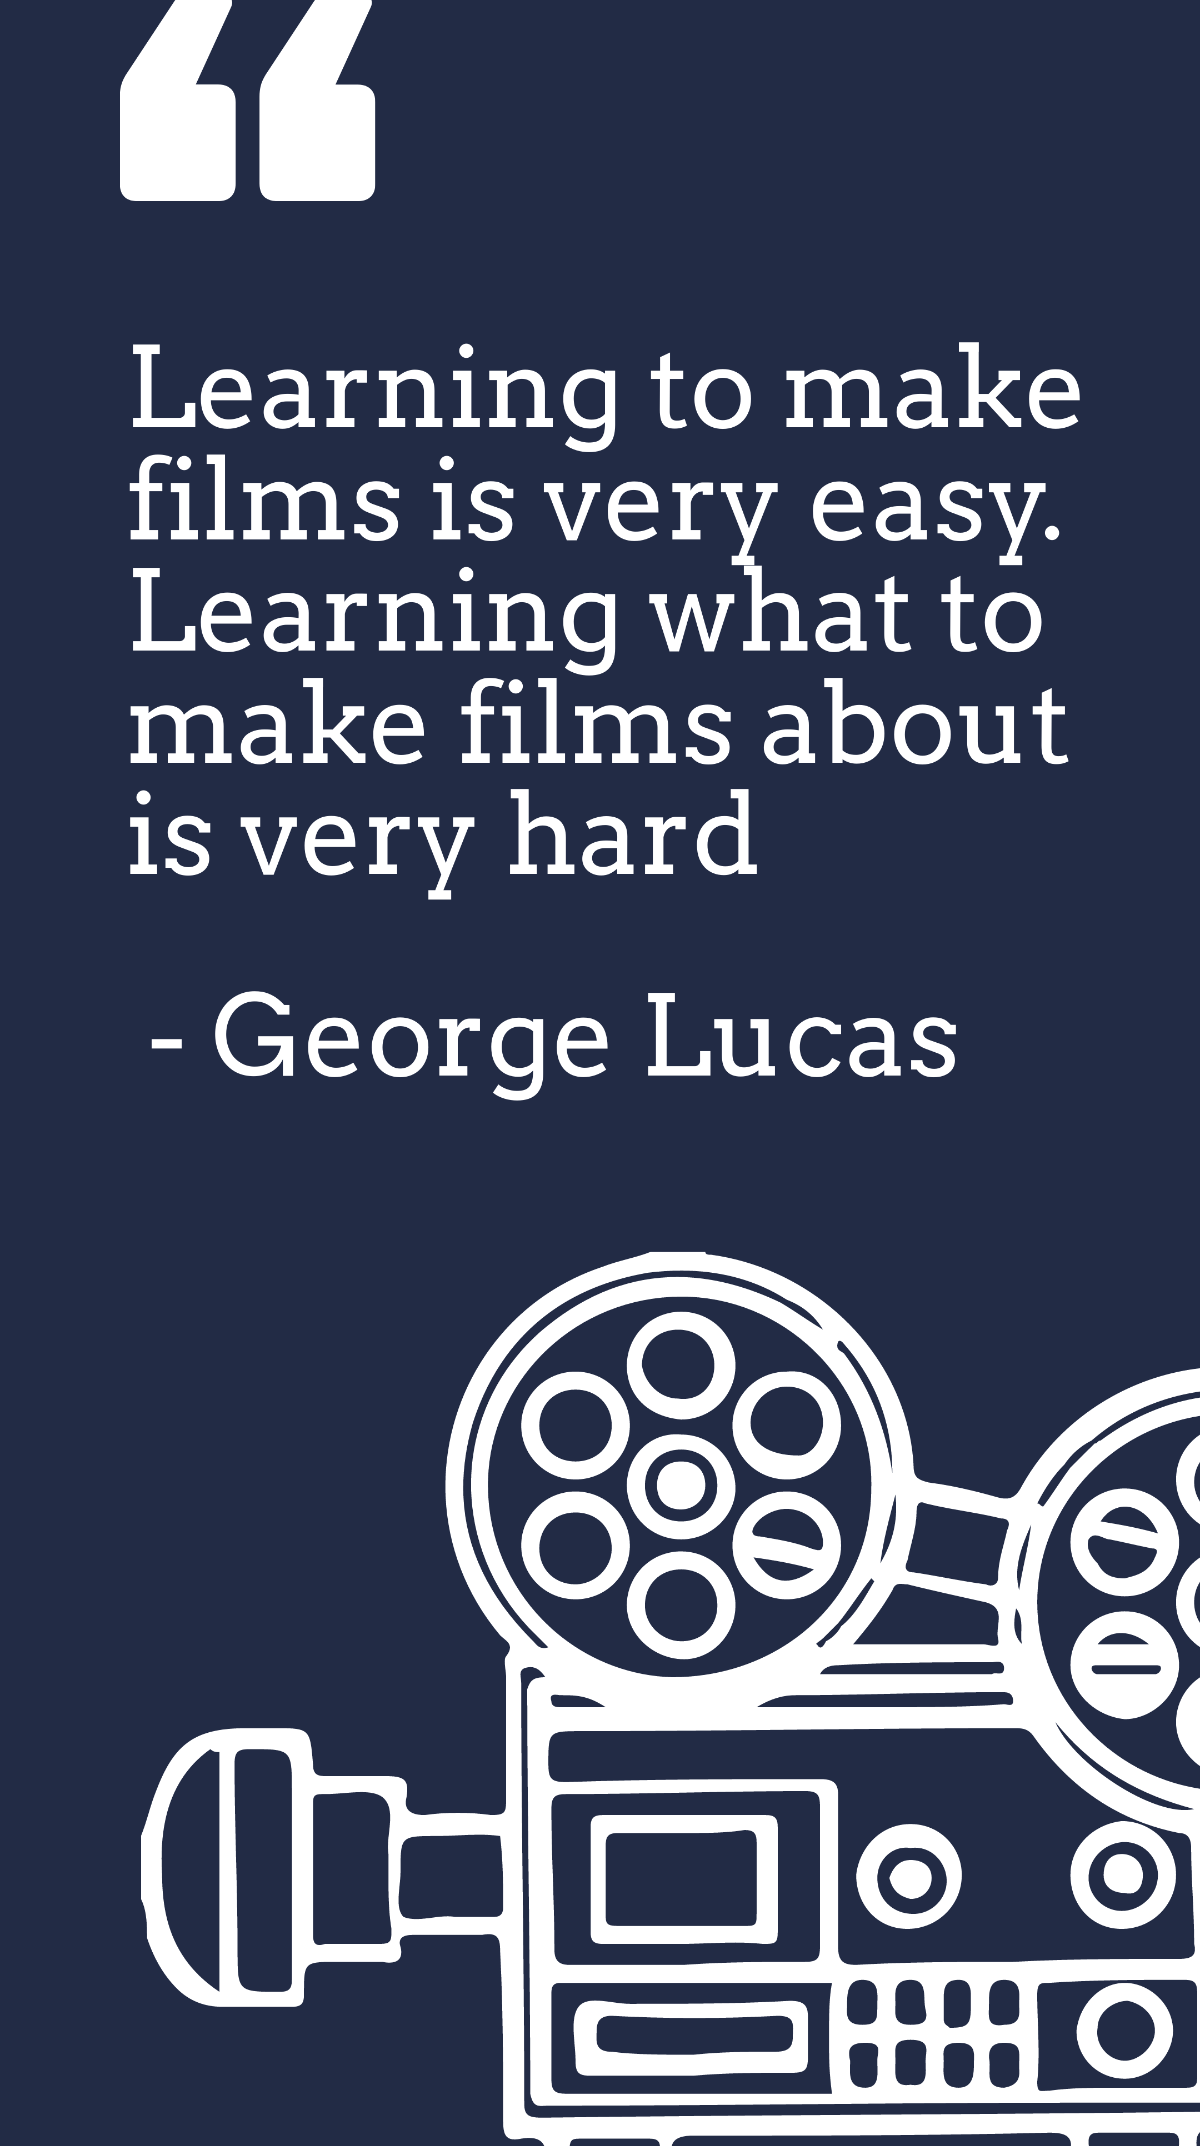 George Lucas-Learning to make films is very easy. Learning what to make films about is very hard Template